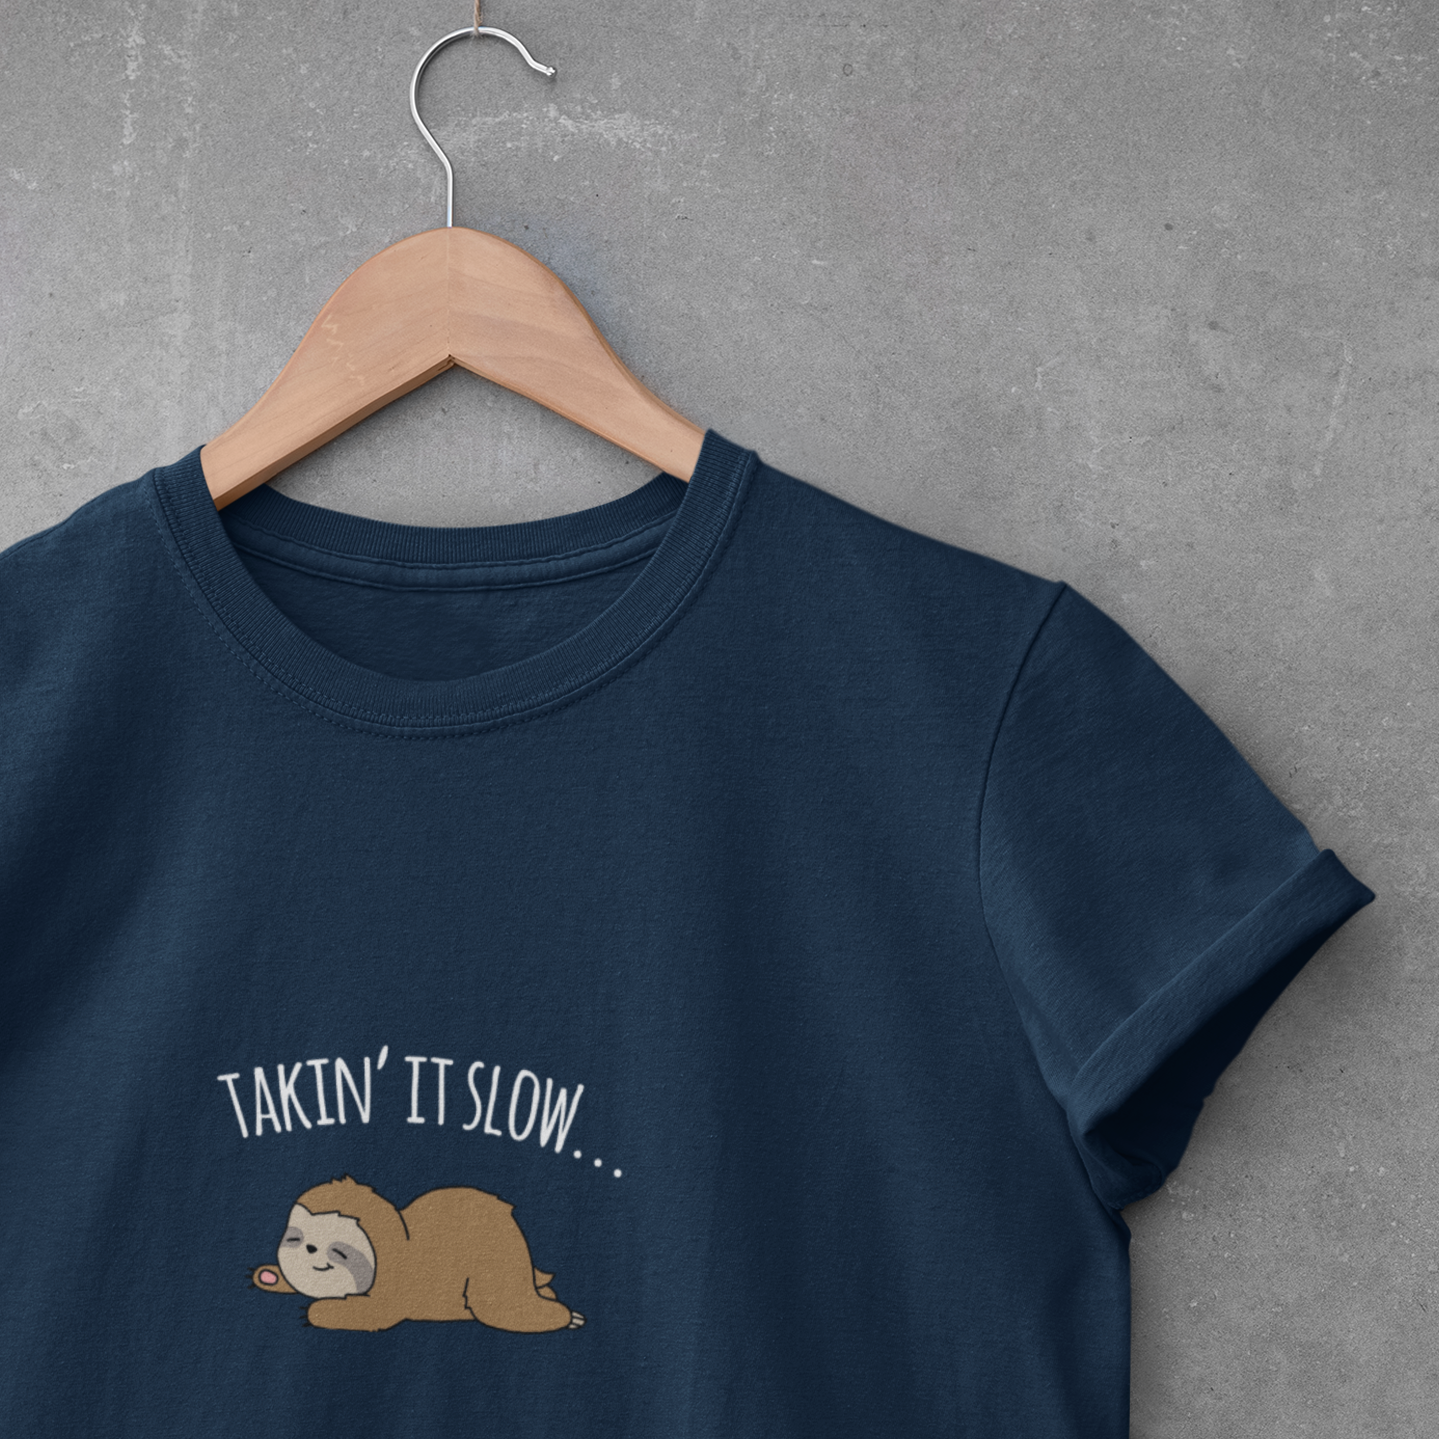 brown sleeping lazy sloth pun advice to take it slow in white text on navy blue hanging t-shirt.